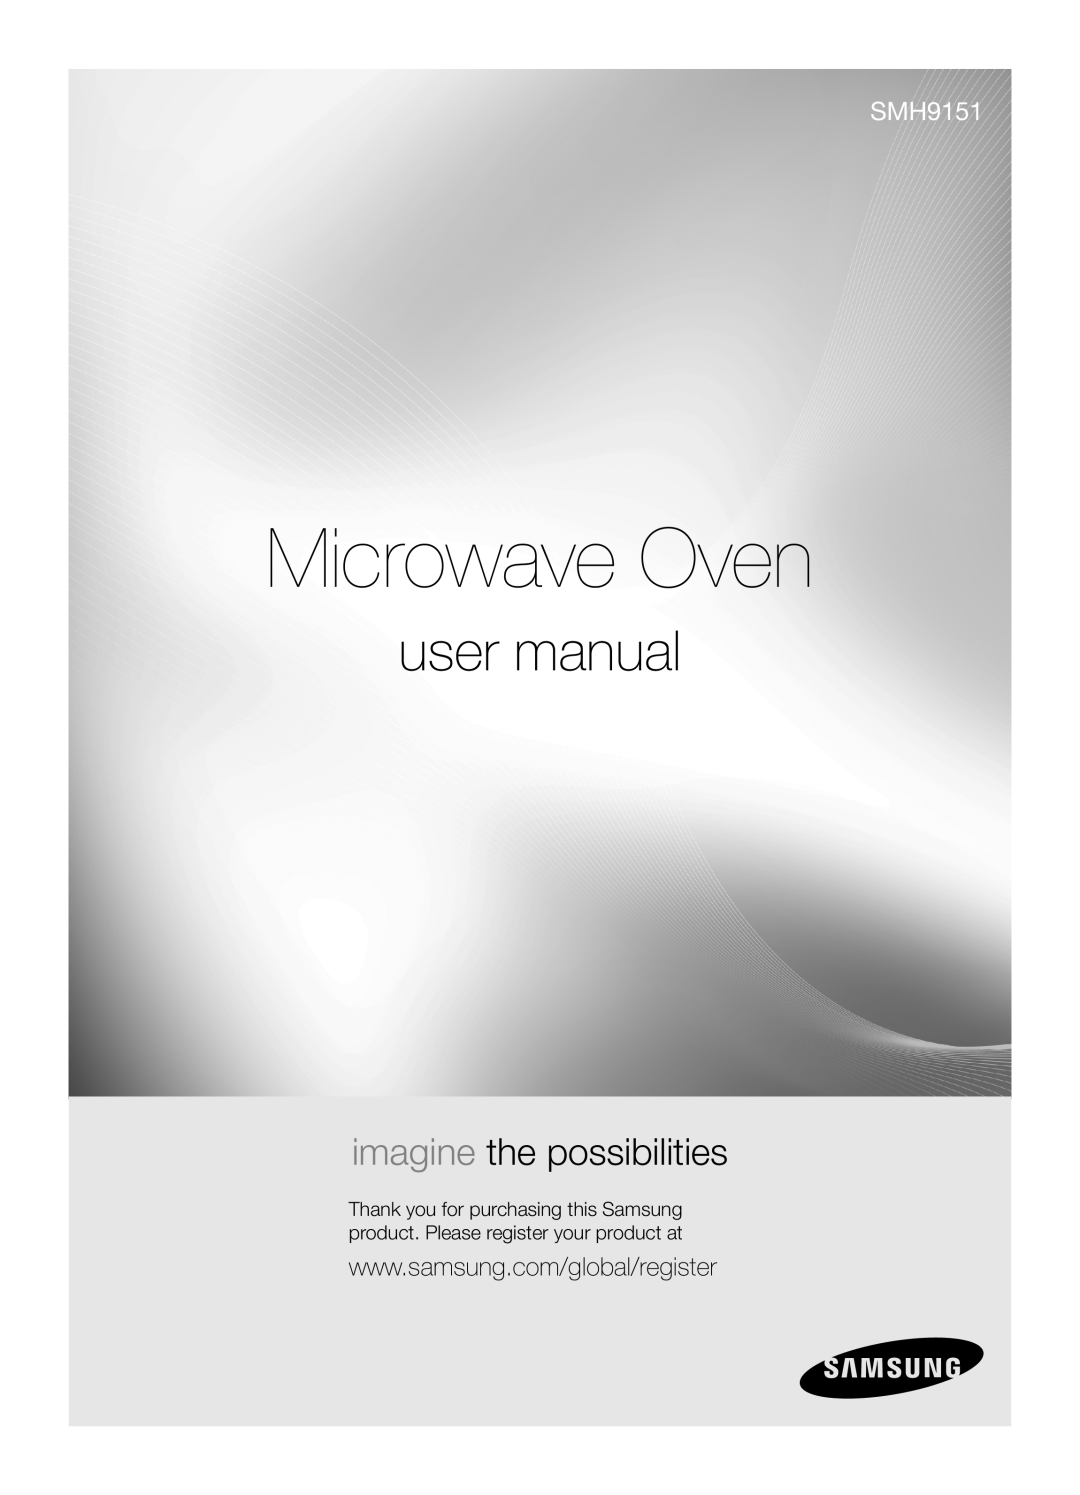 Samsung SMH9151 user manual Microwave Oven, imagine the possibilities 